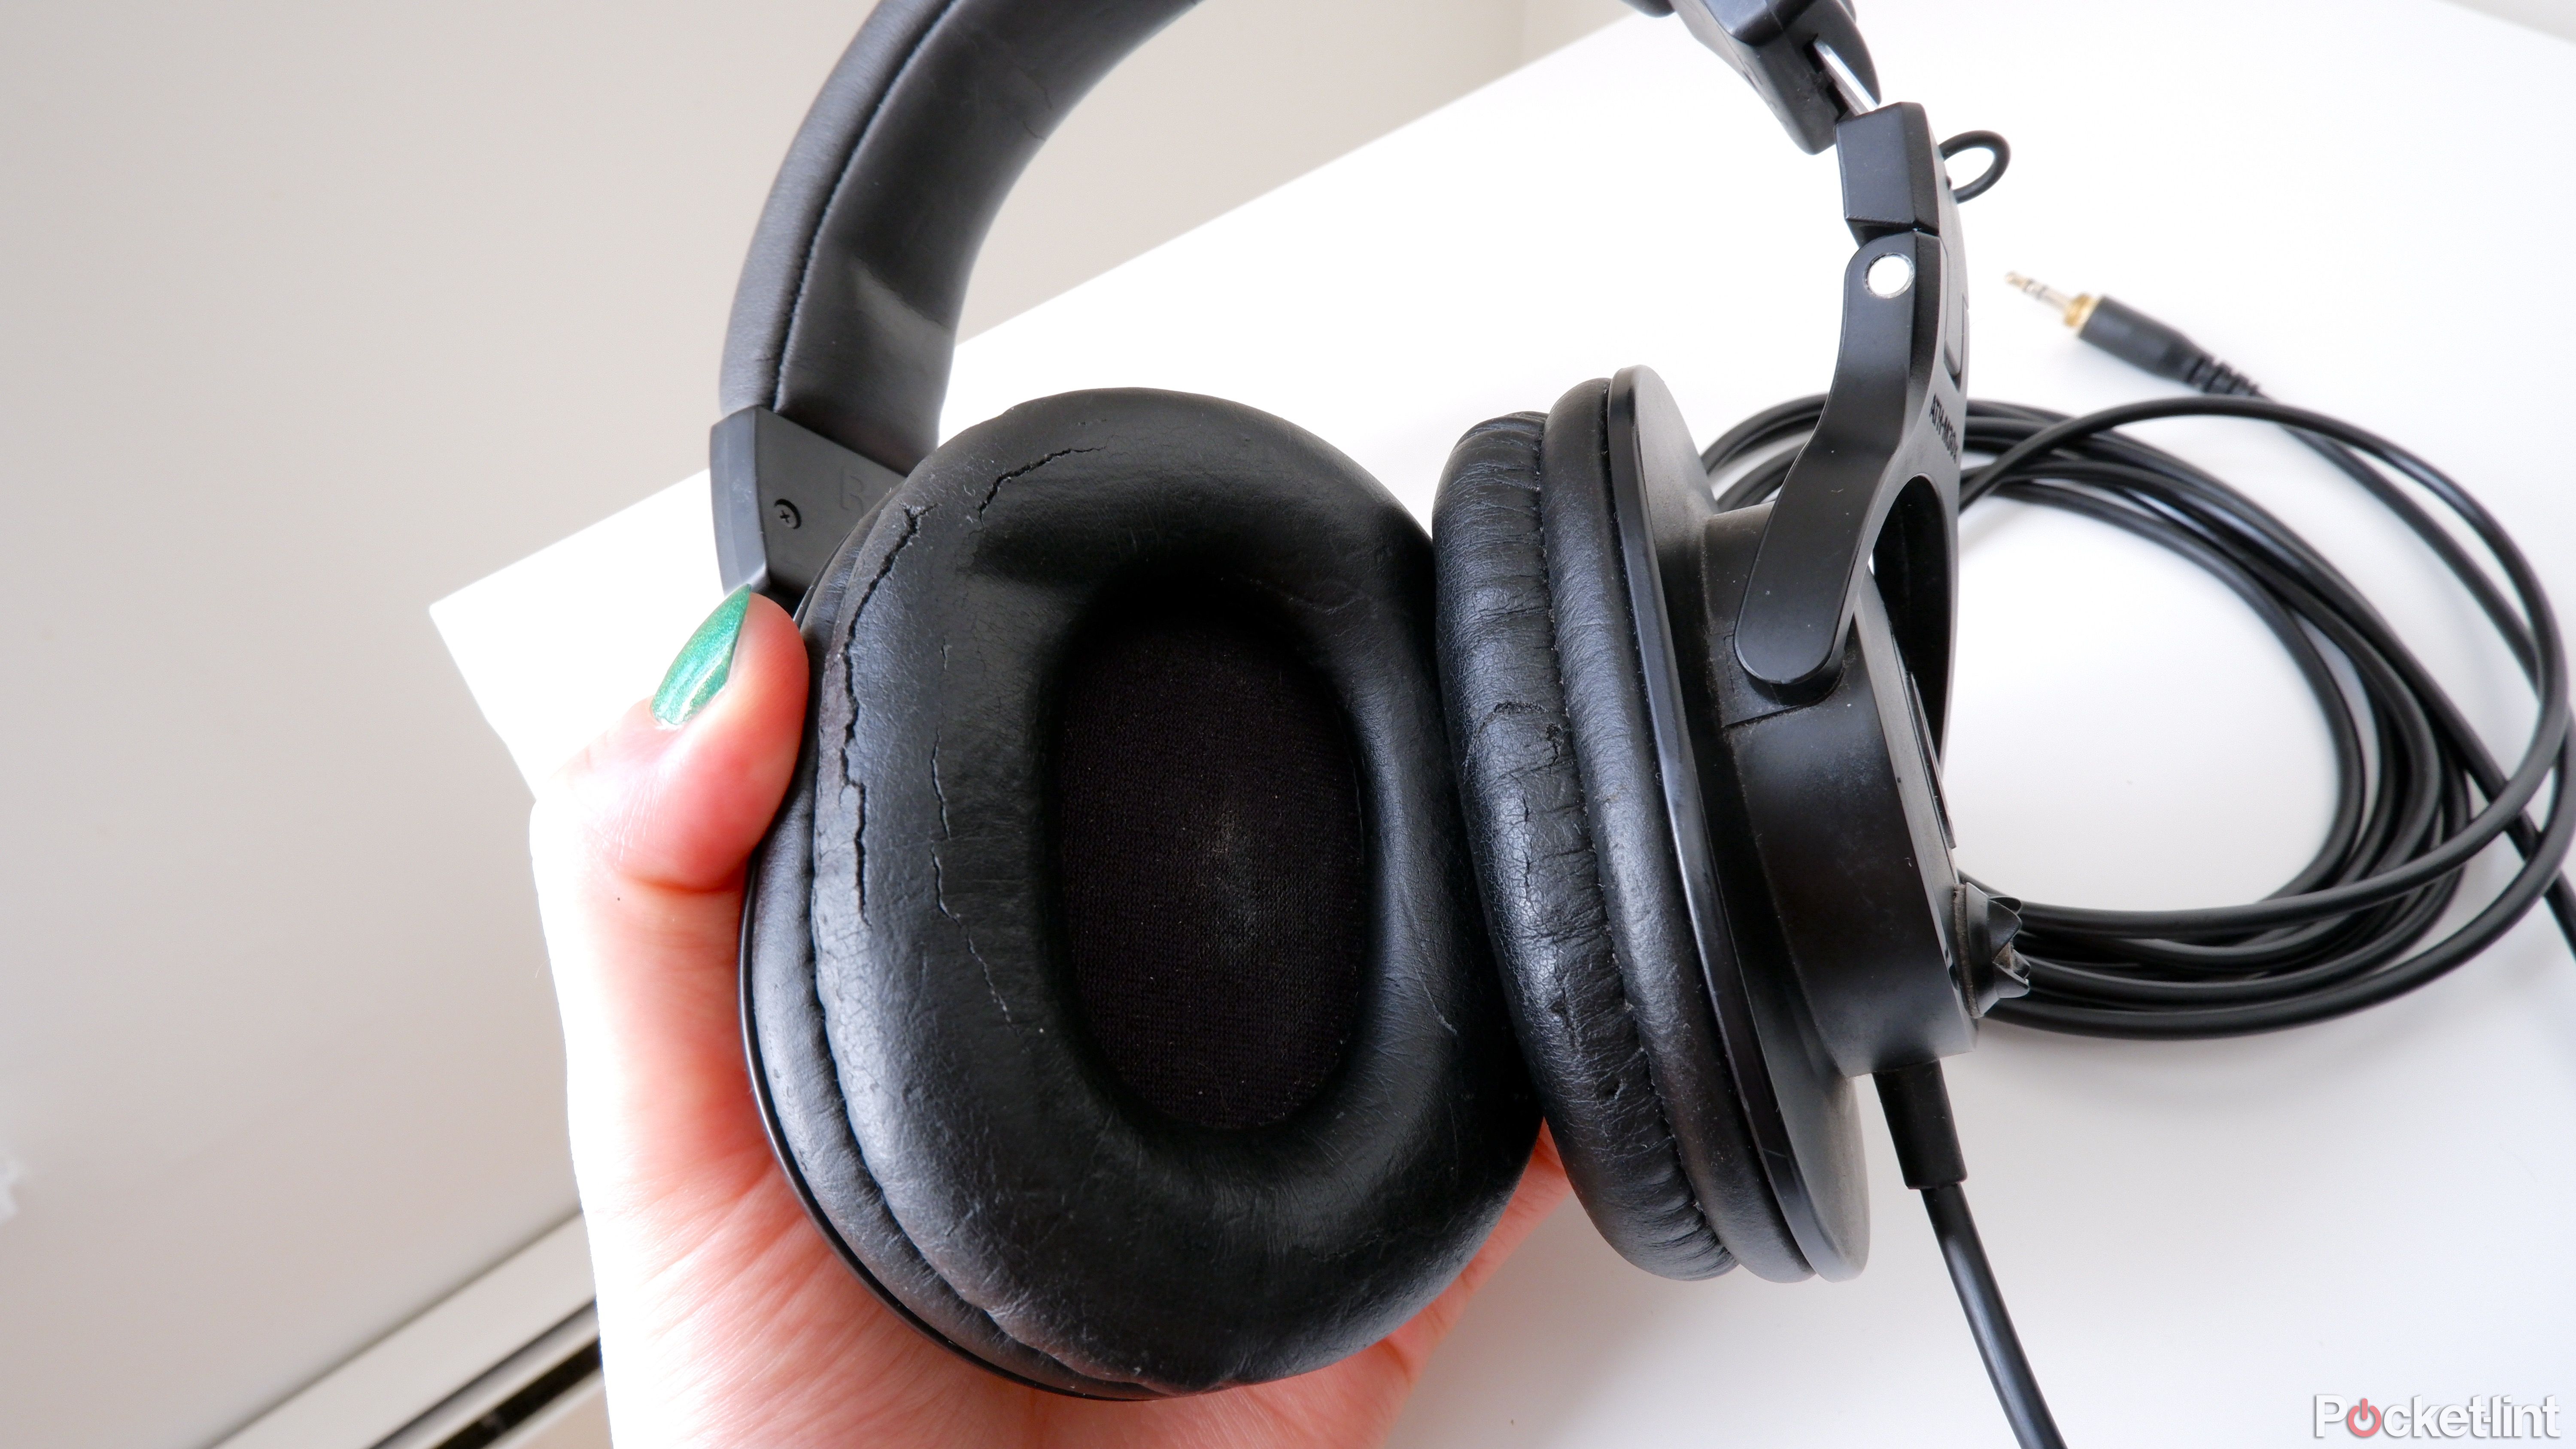 The Audio-Technica ATH-M30x being held by a hand, showing the ear cups close up